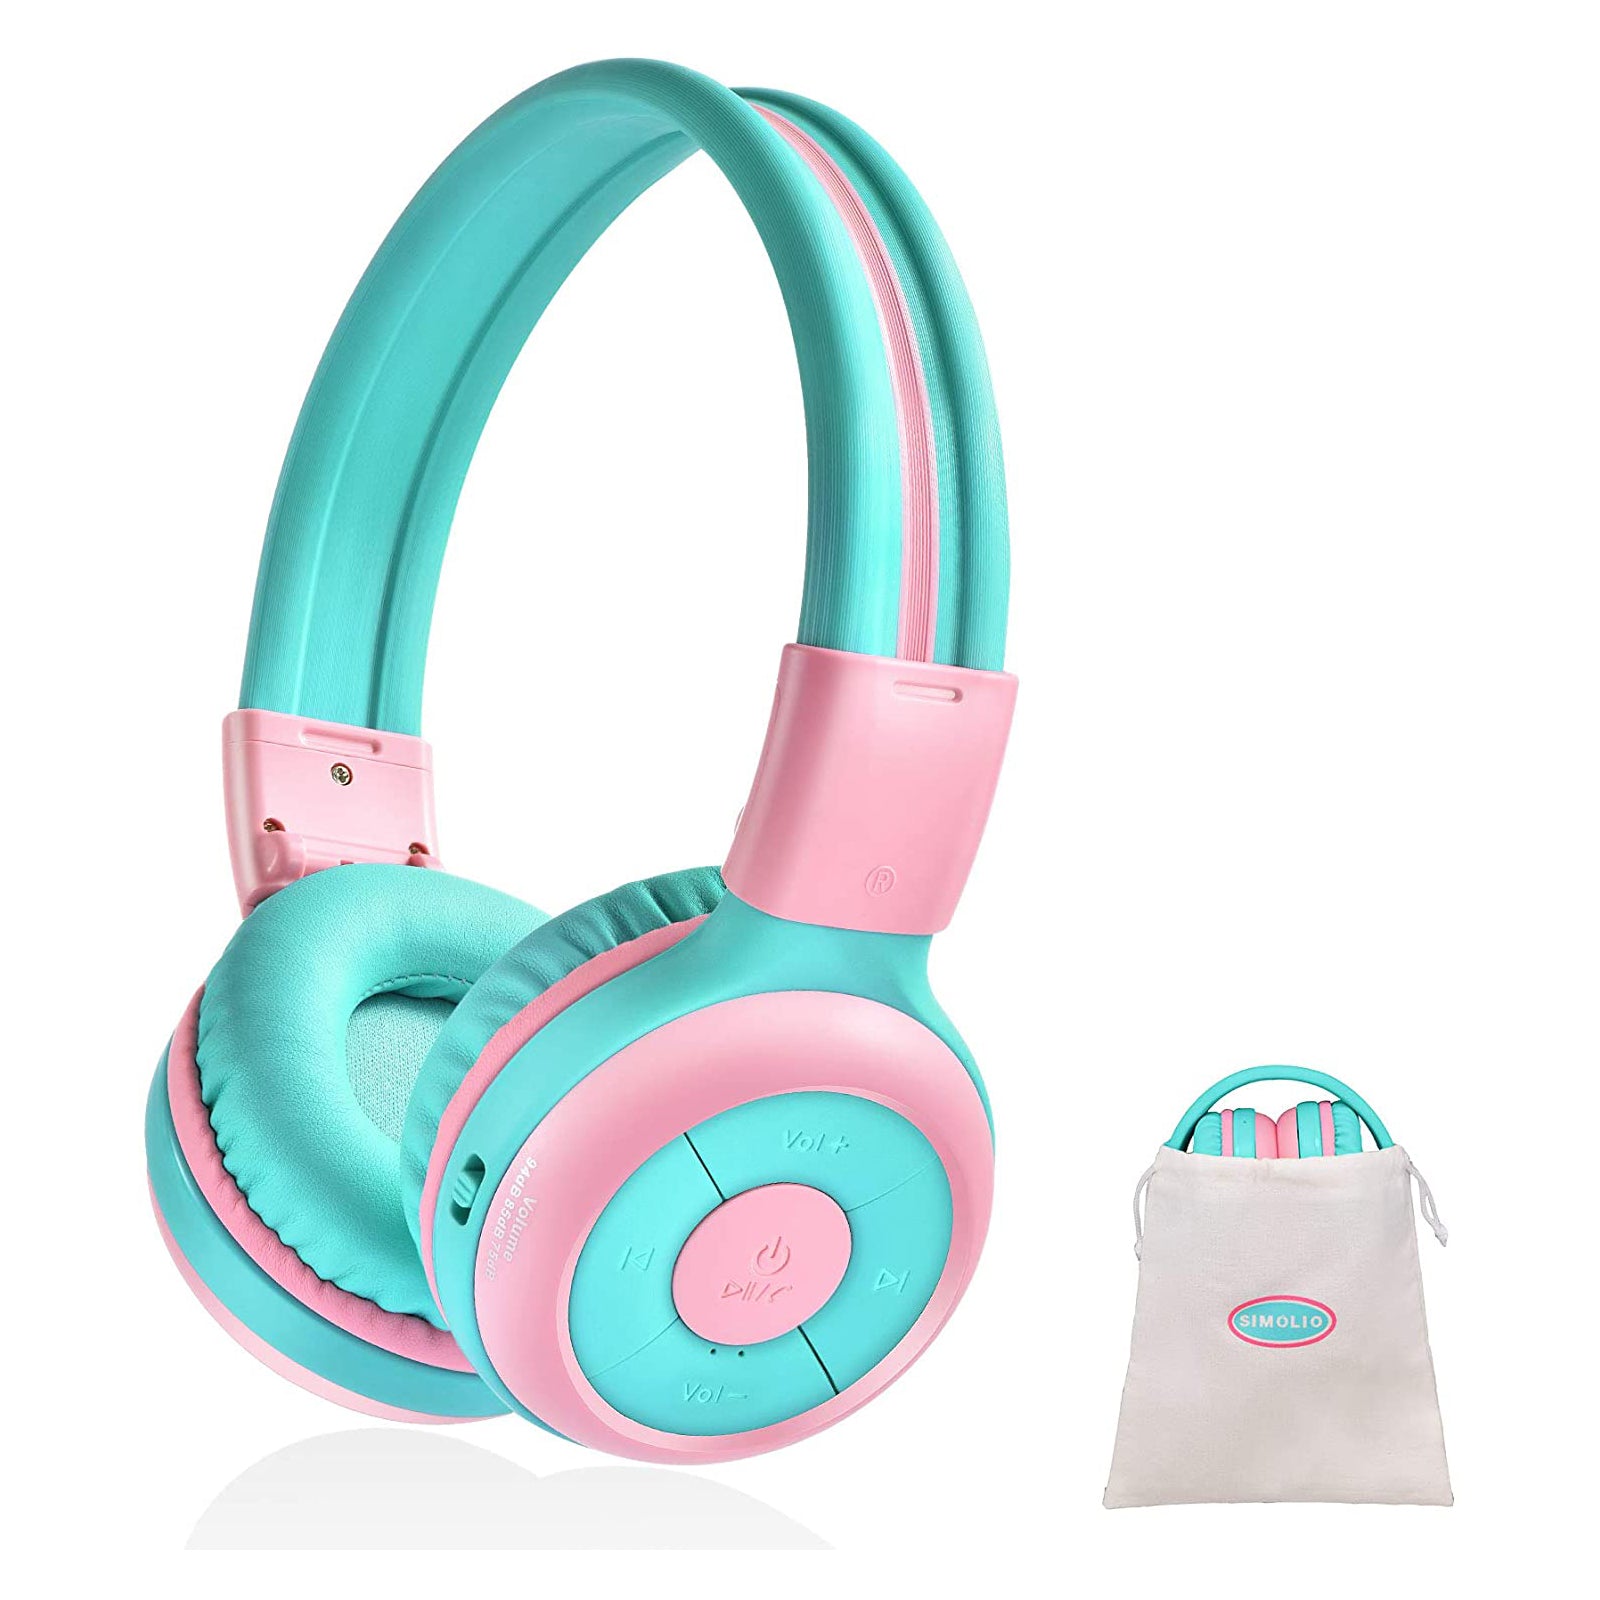 Simolio JH-714A kids bluetooth headphones with pouch for storage